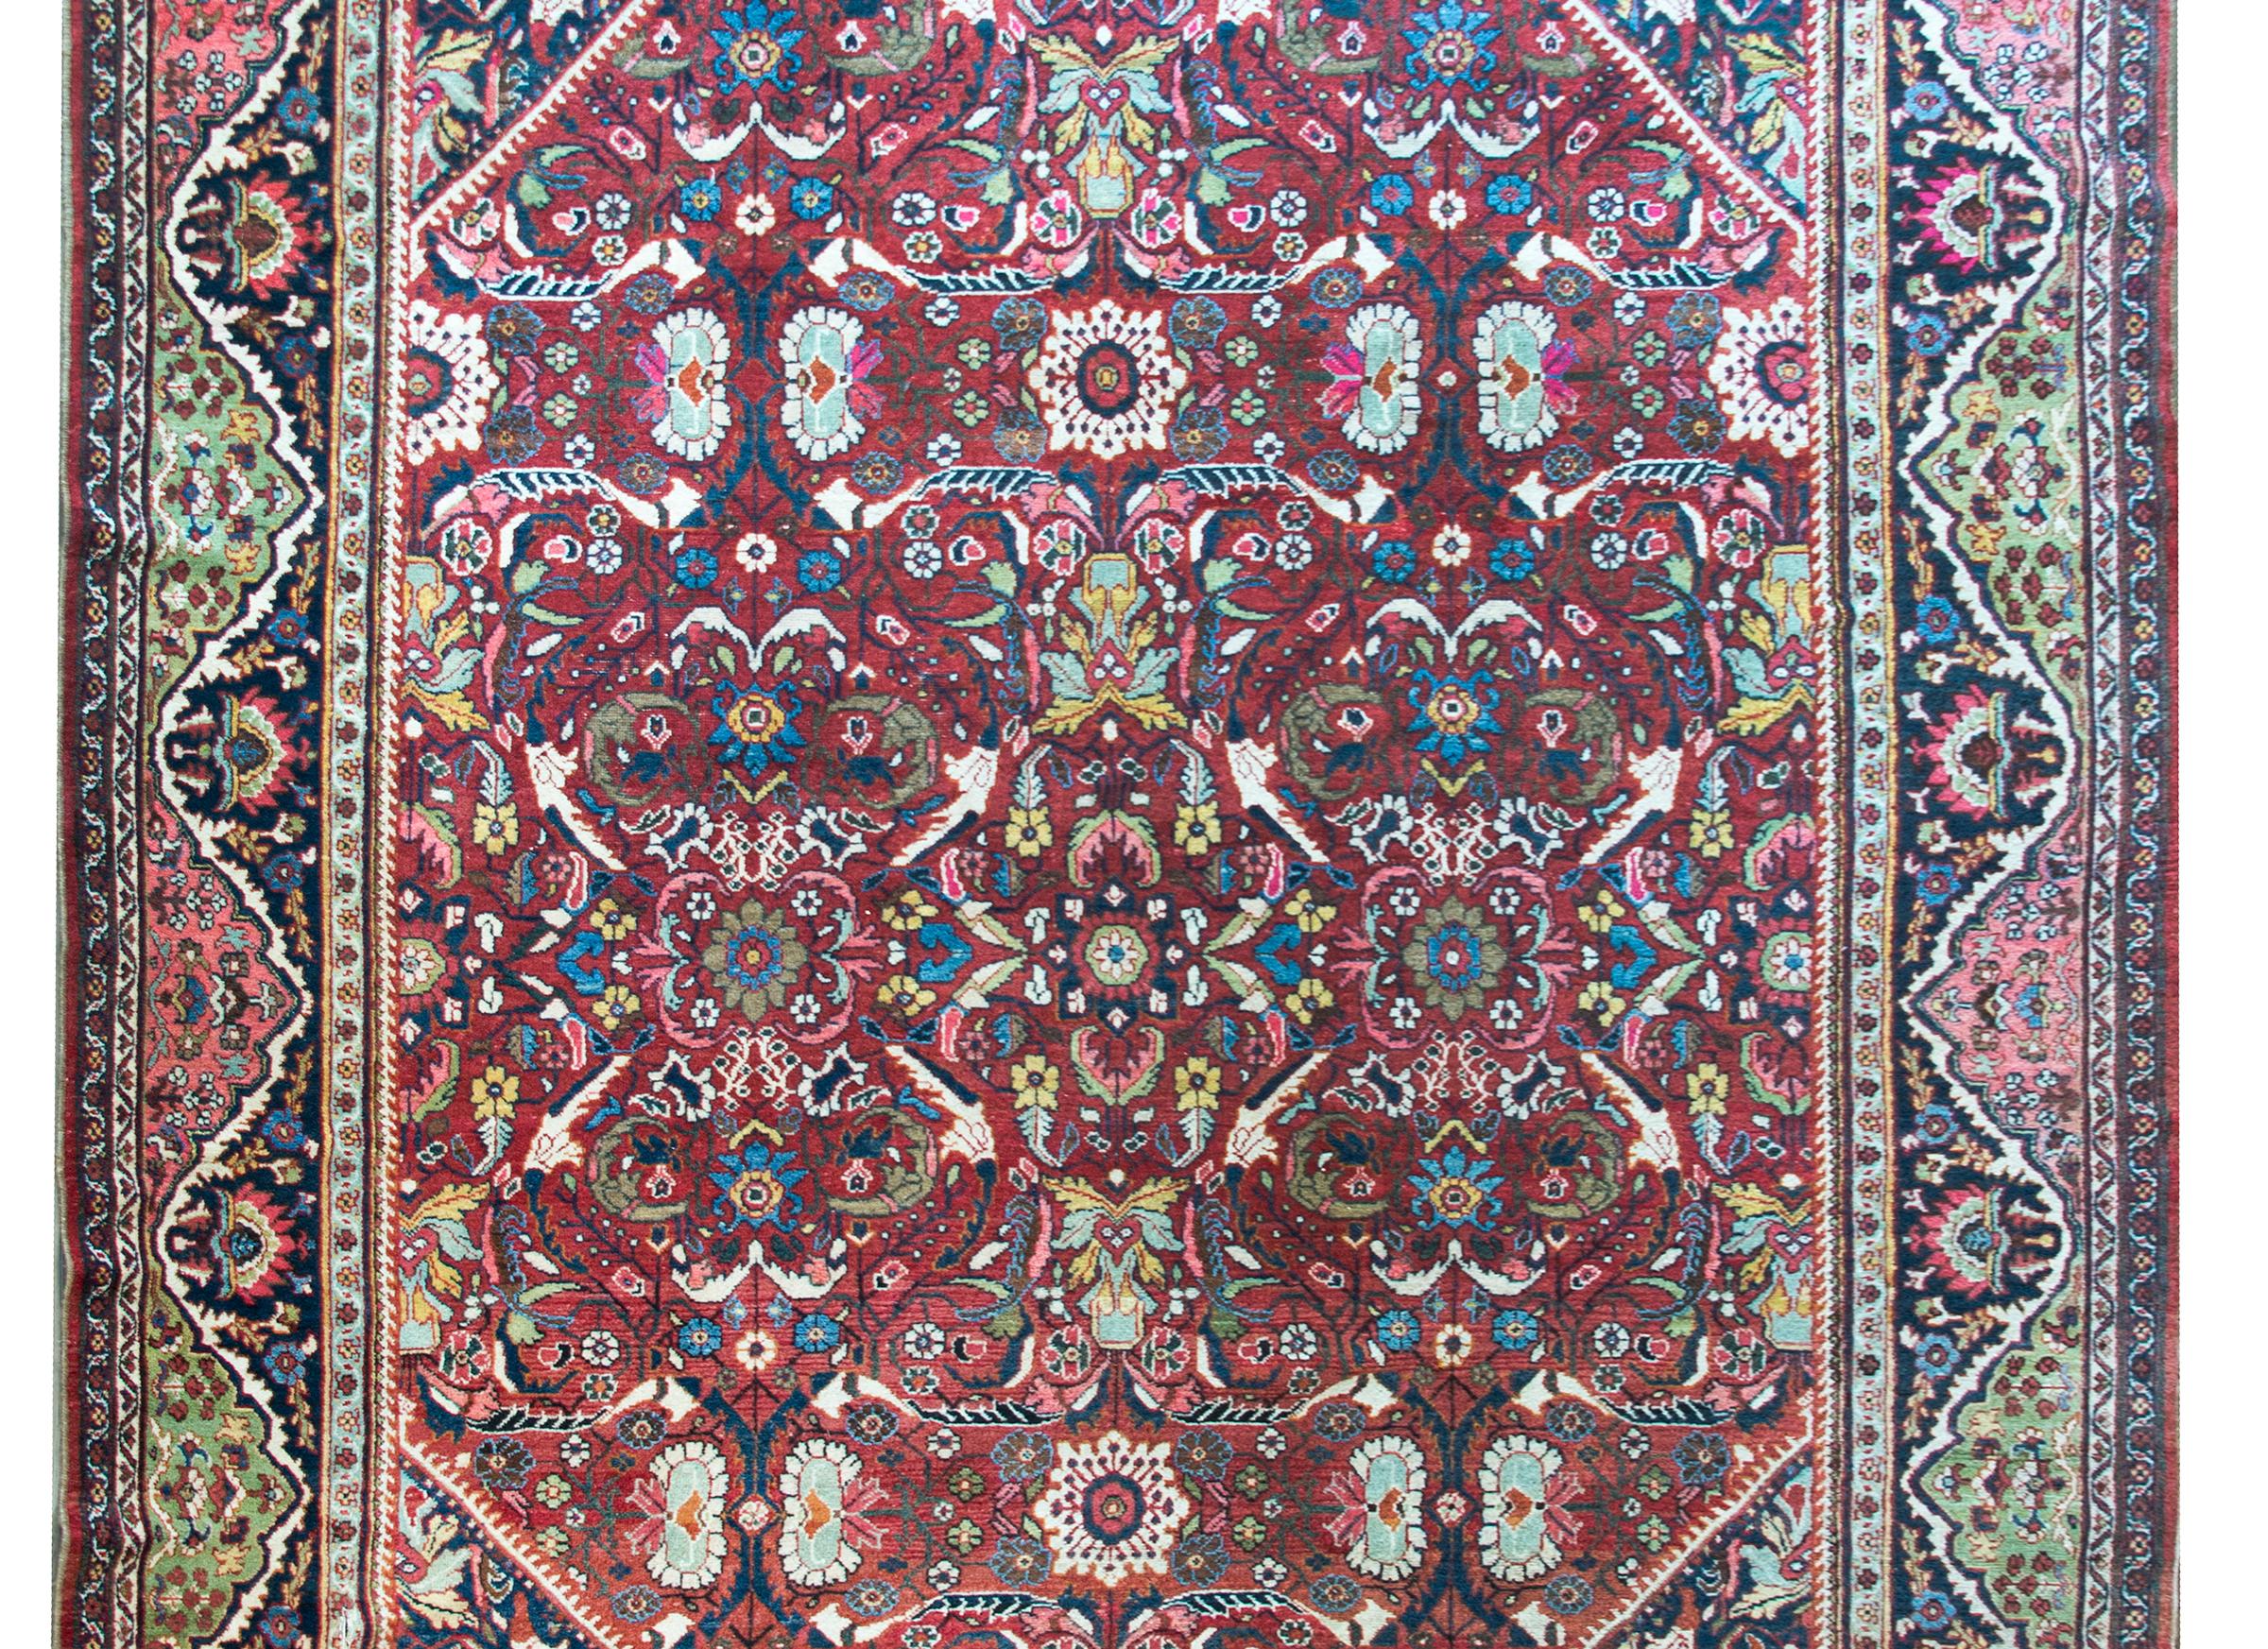 A spectacular early 20th century Persian Mahal rug with an all-over mirrored floral pattern with large and small flowers and leaves in a trellis pattern, and surrounded by border with repeated flowers, and all woven in myriad colors including